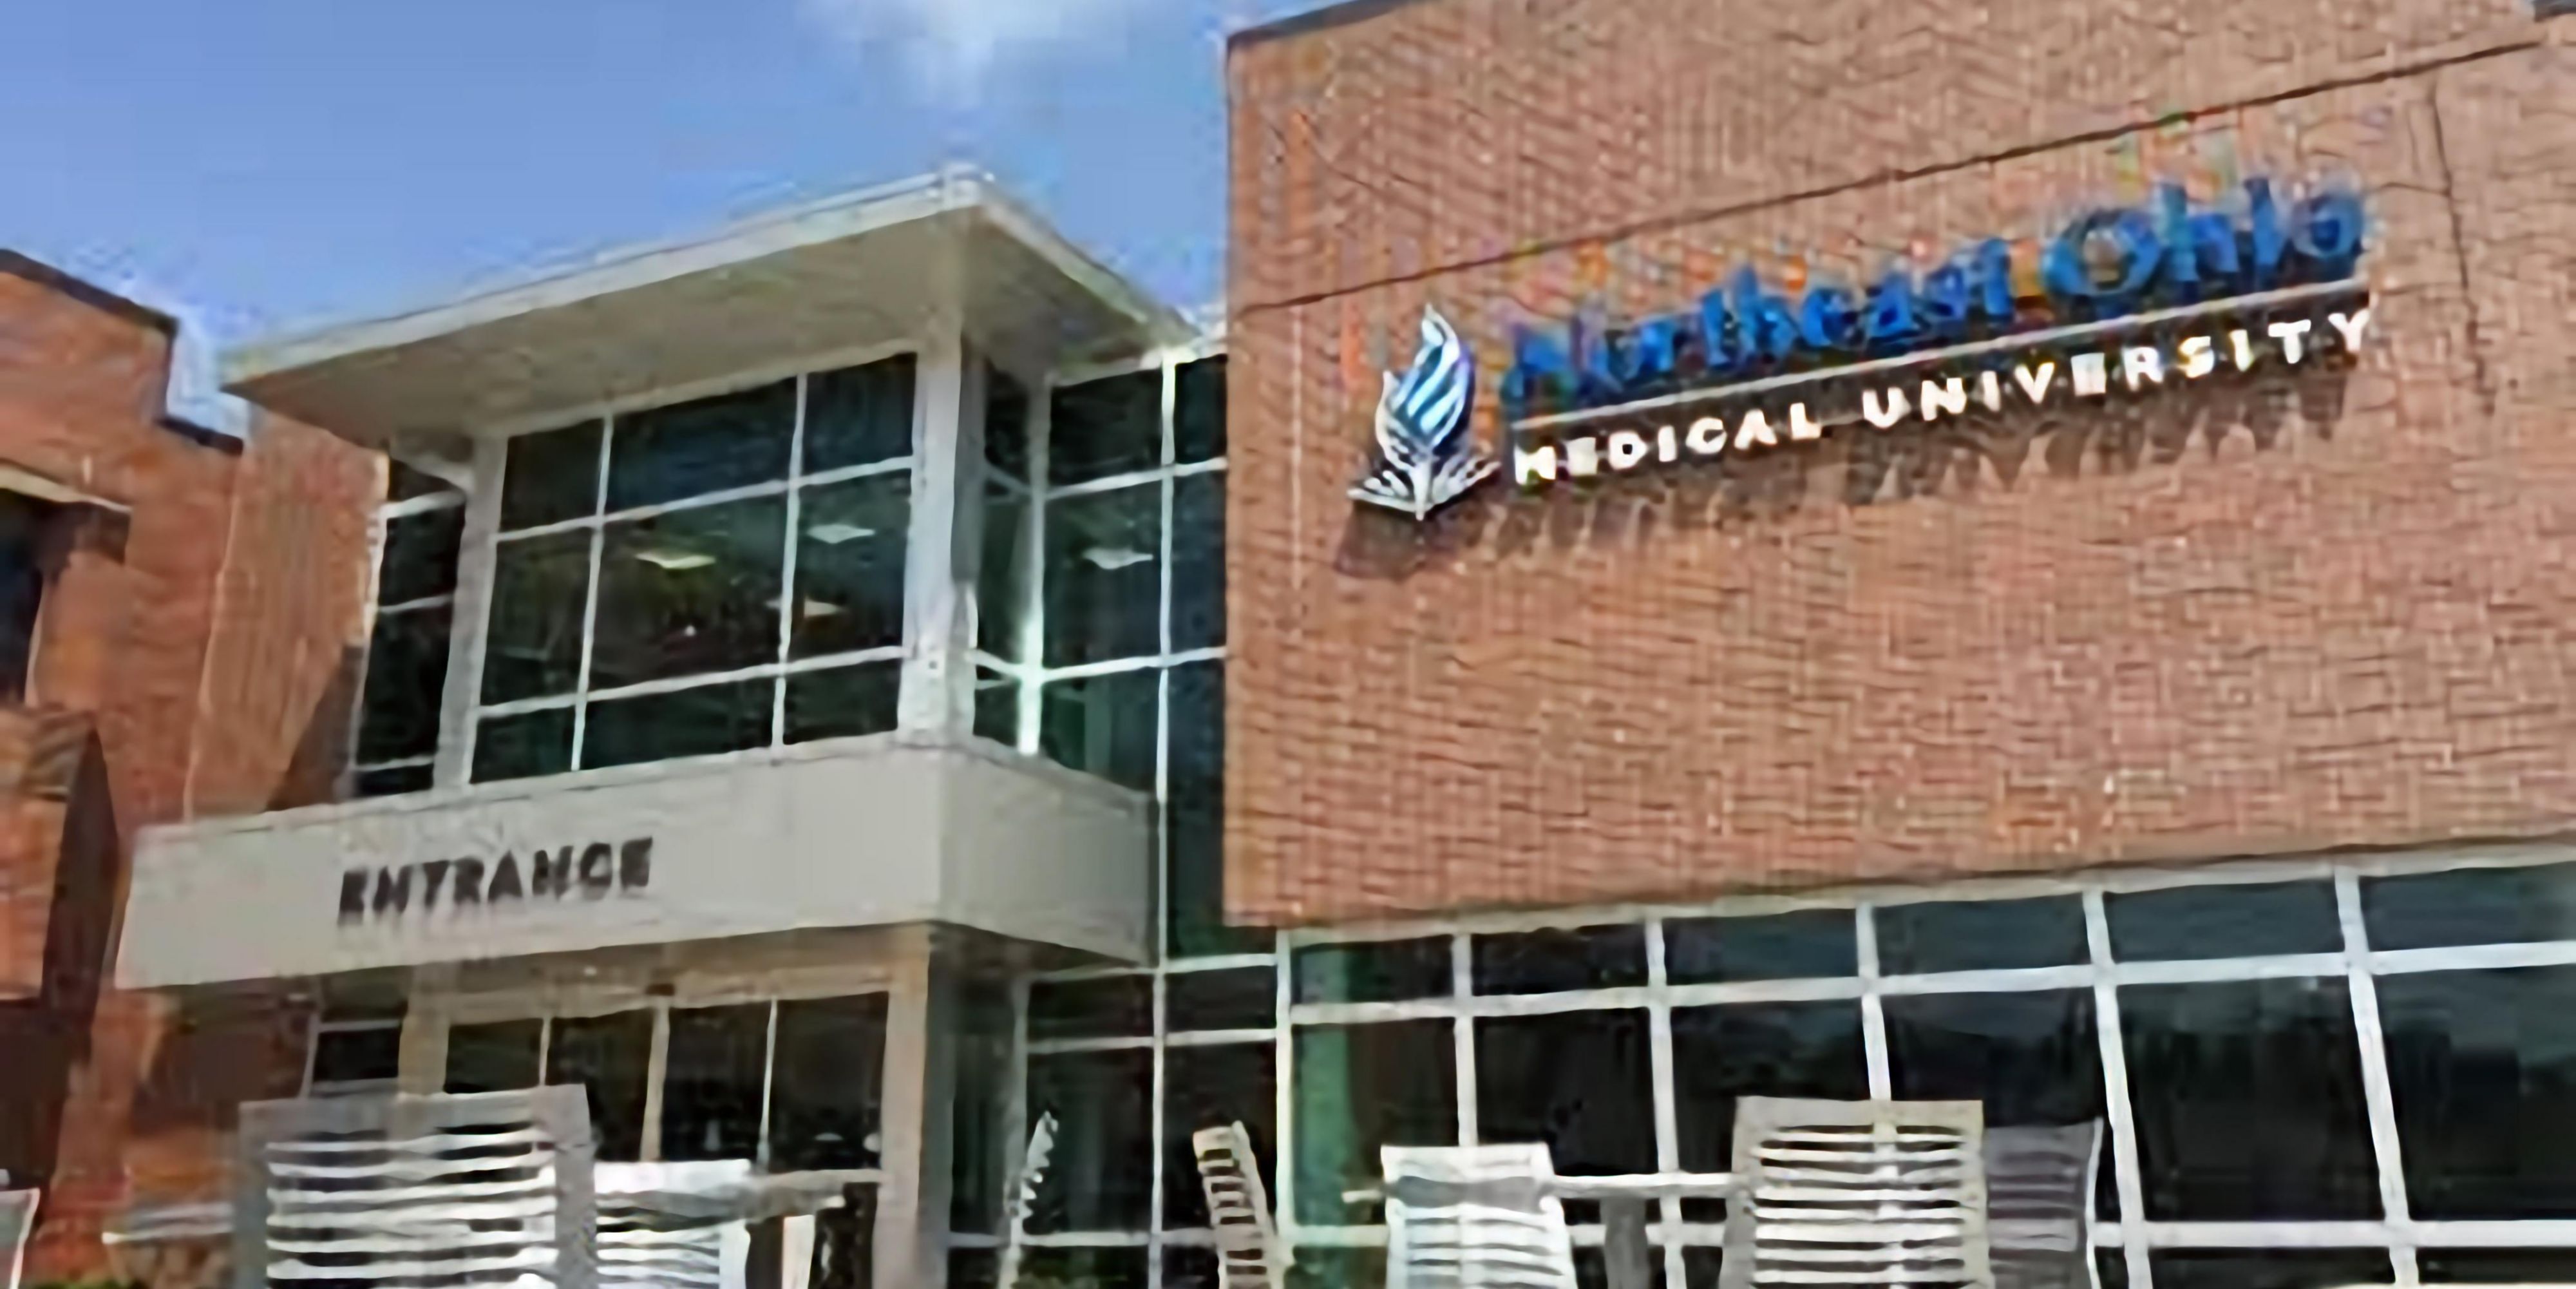 We are conveniently located only minutes from NEOMED, Northeast Ohio Medical University.  Planning on visiting the university, why not stay with us and enjoy our attractions.